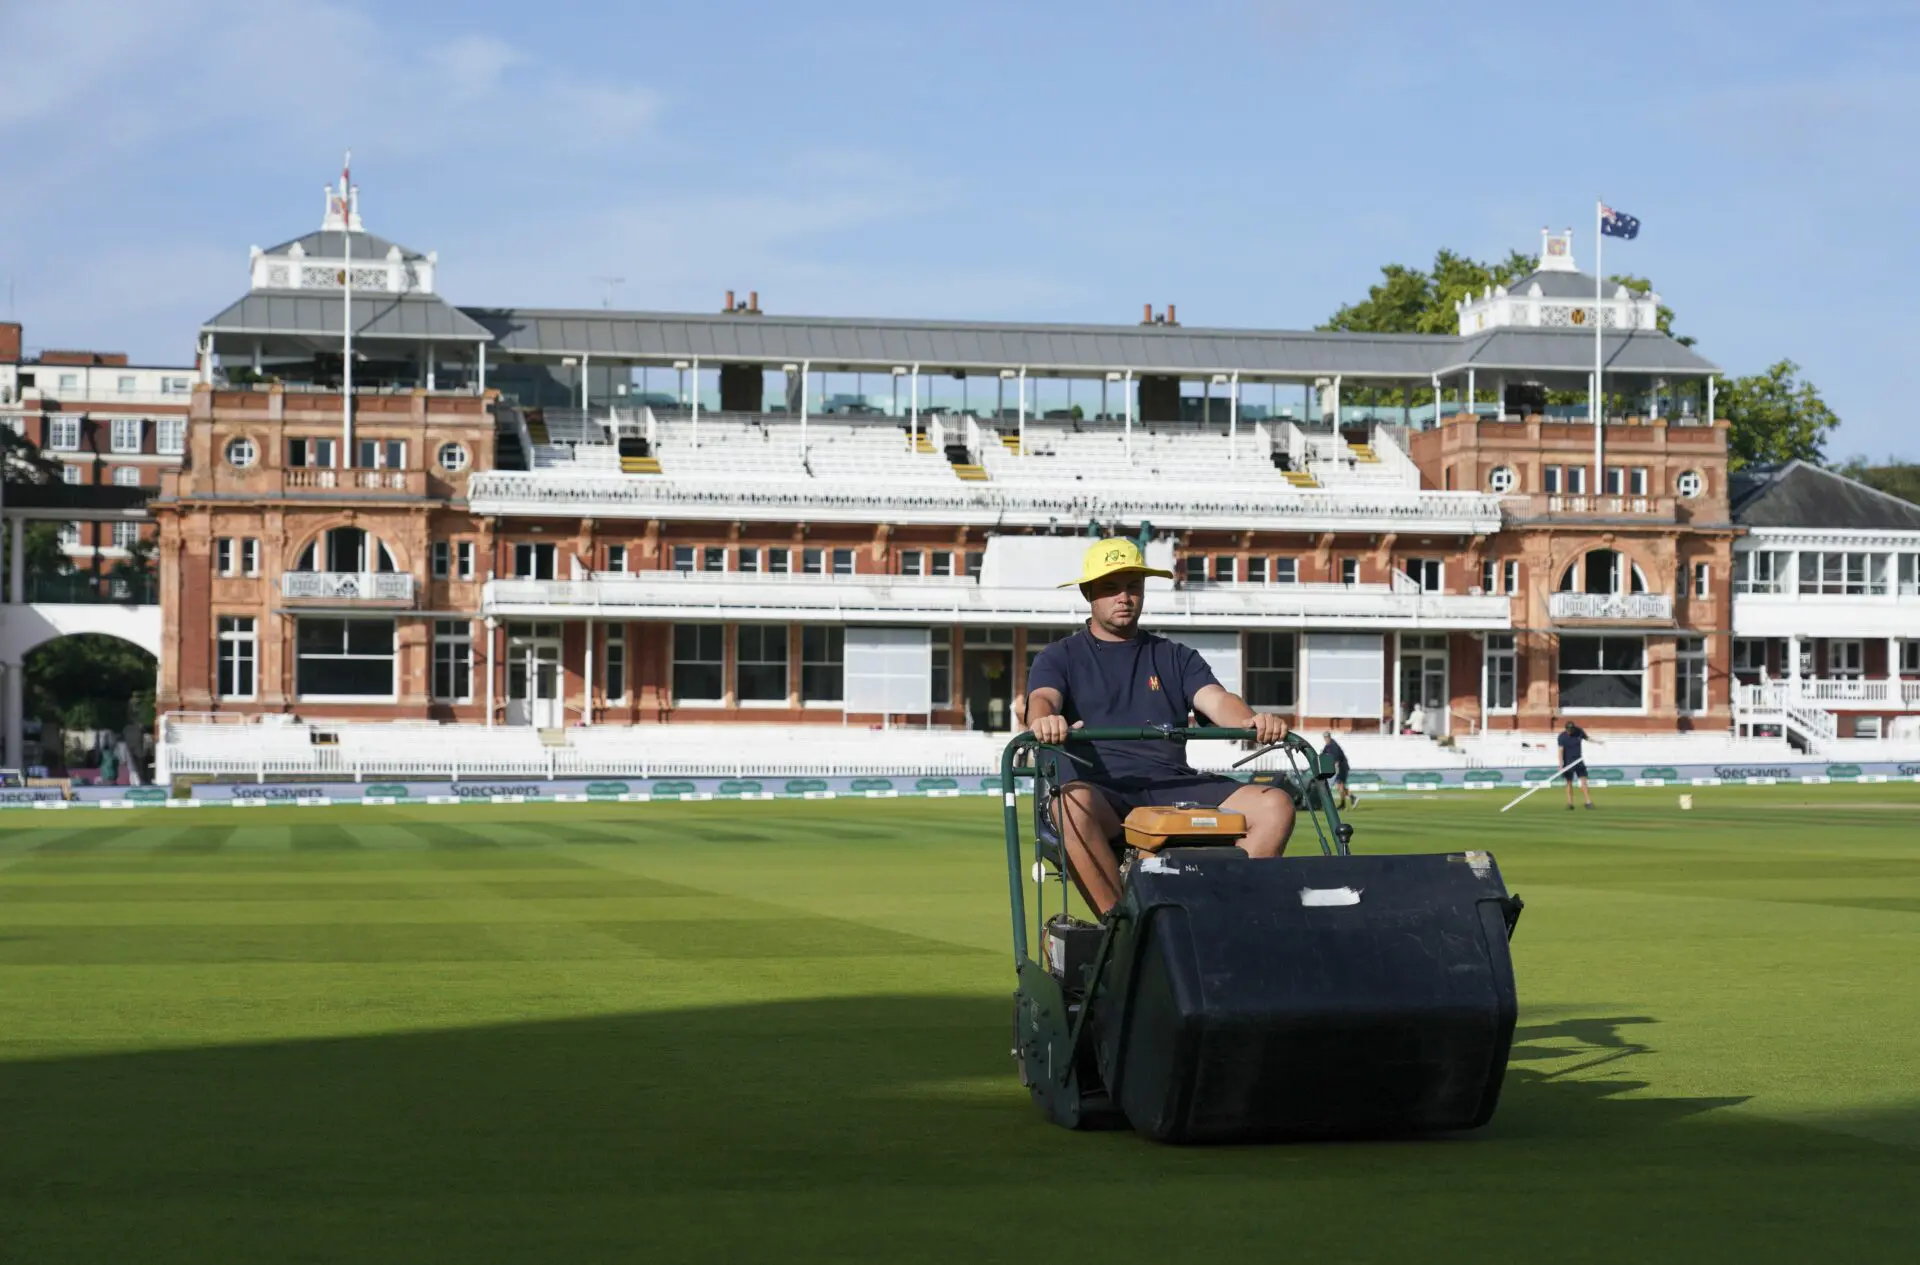 Gardener on the lawn at Lord's Cricket ground